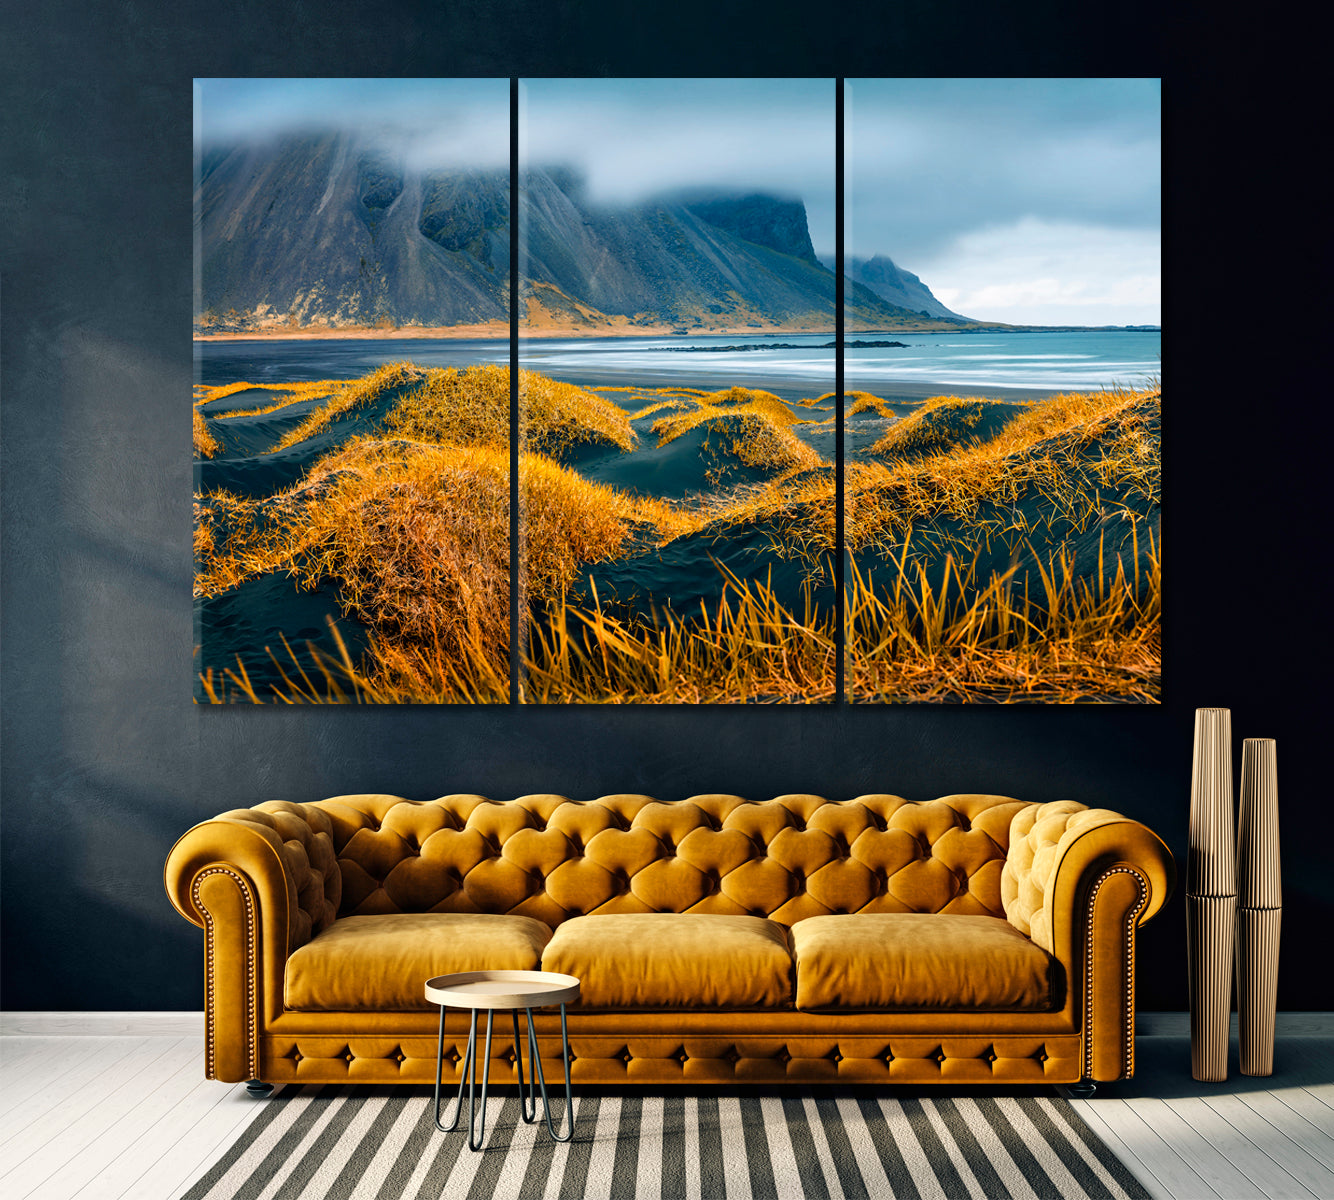 Vestrahorn Mountain and Stokksnes Beach Iceland Canvas Print ArtLexy 3 Panels 36"x24" inches 